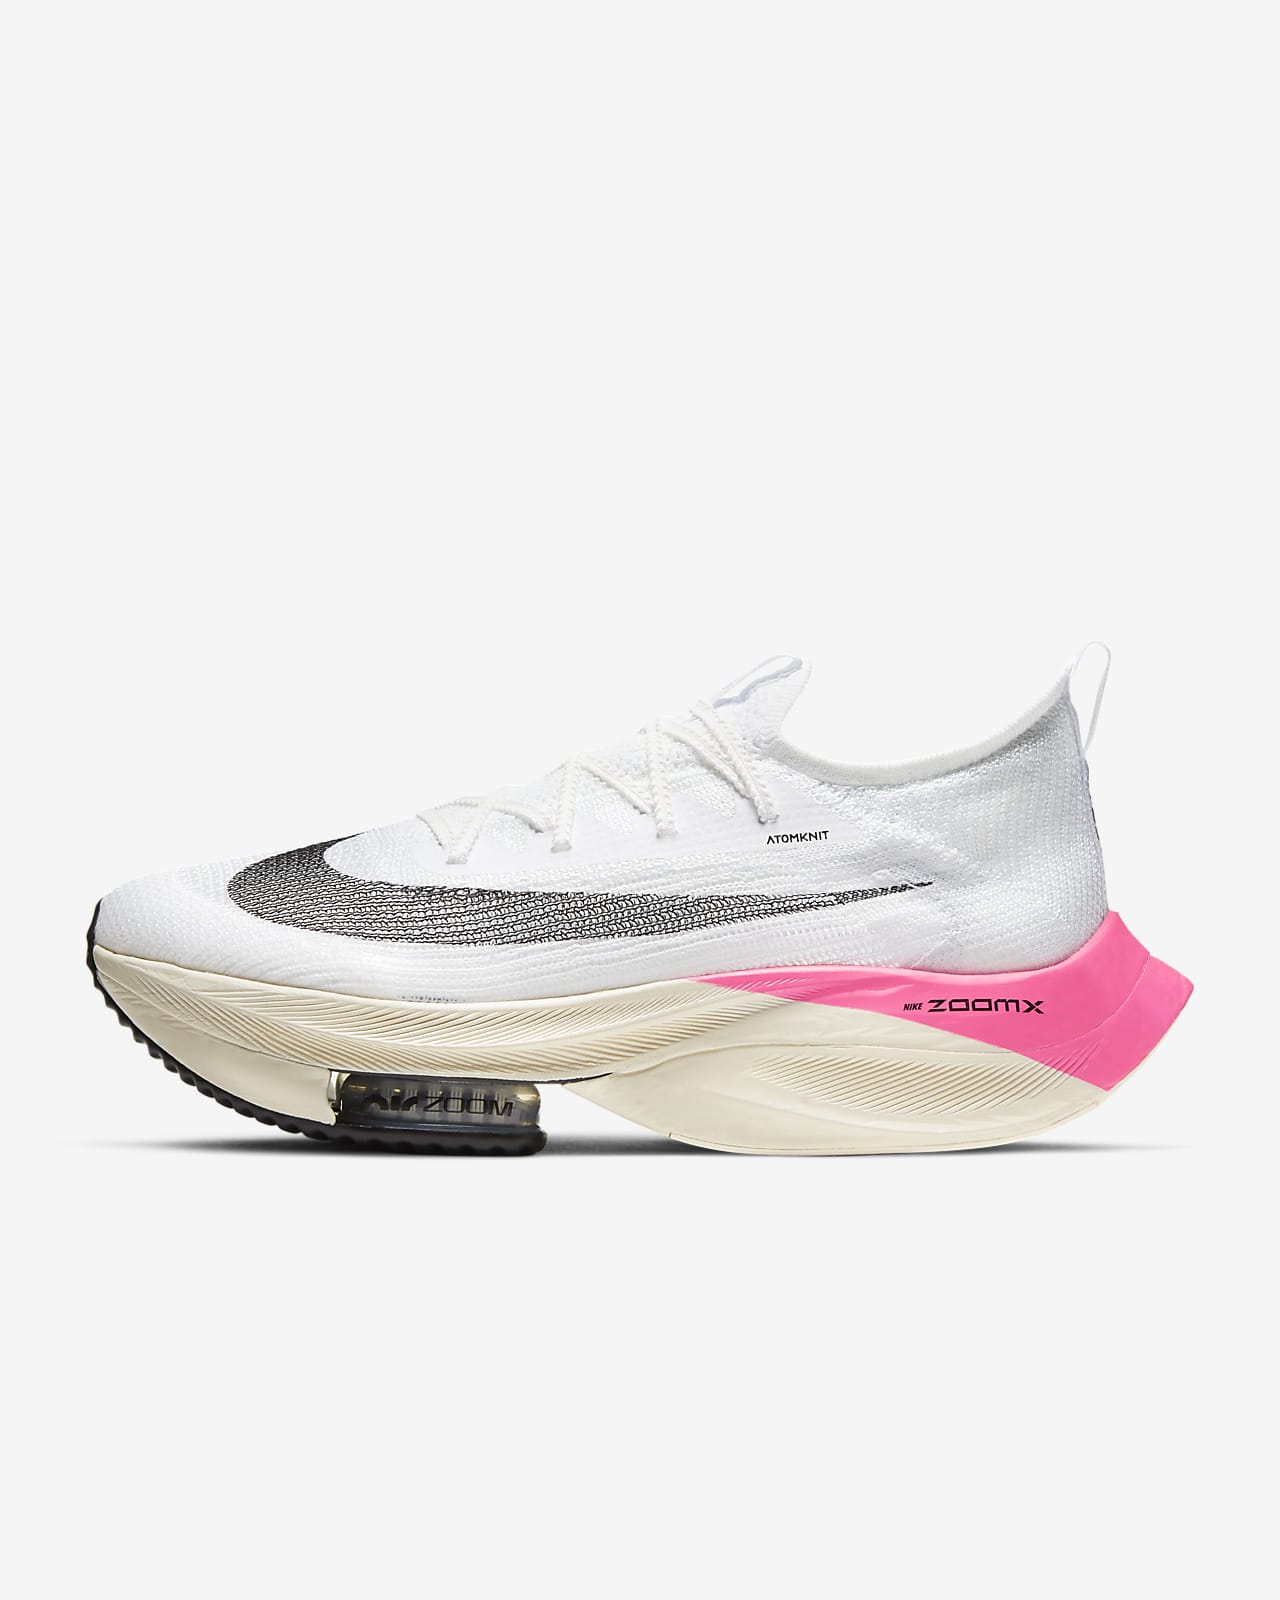 Mediante Ostentoso Céntrico Nike Air Zoom Alphafly NEXT% Eliud Kipchoge Men's Road Racing Shoes. Nike JP